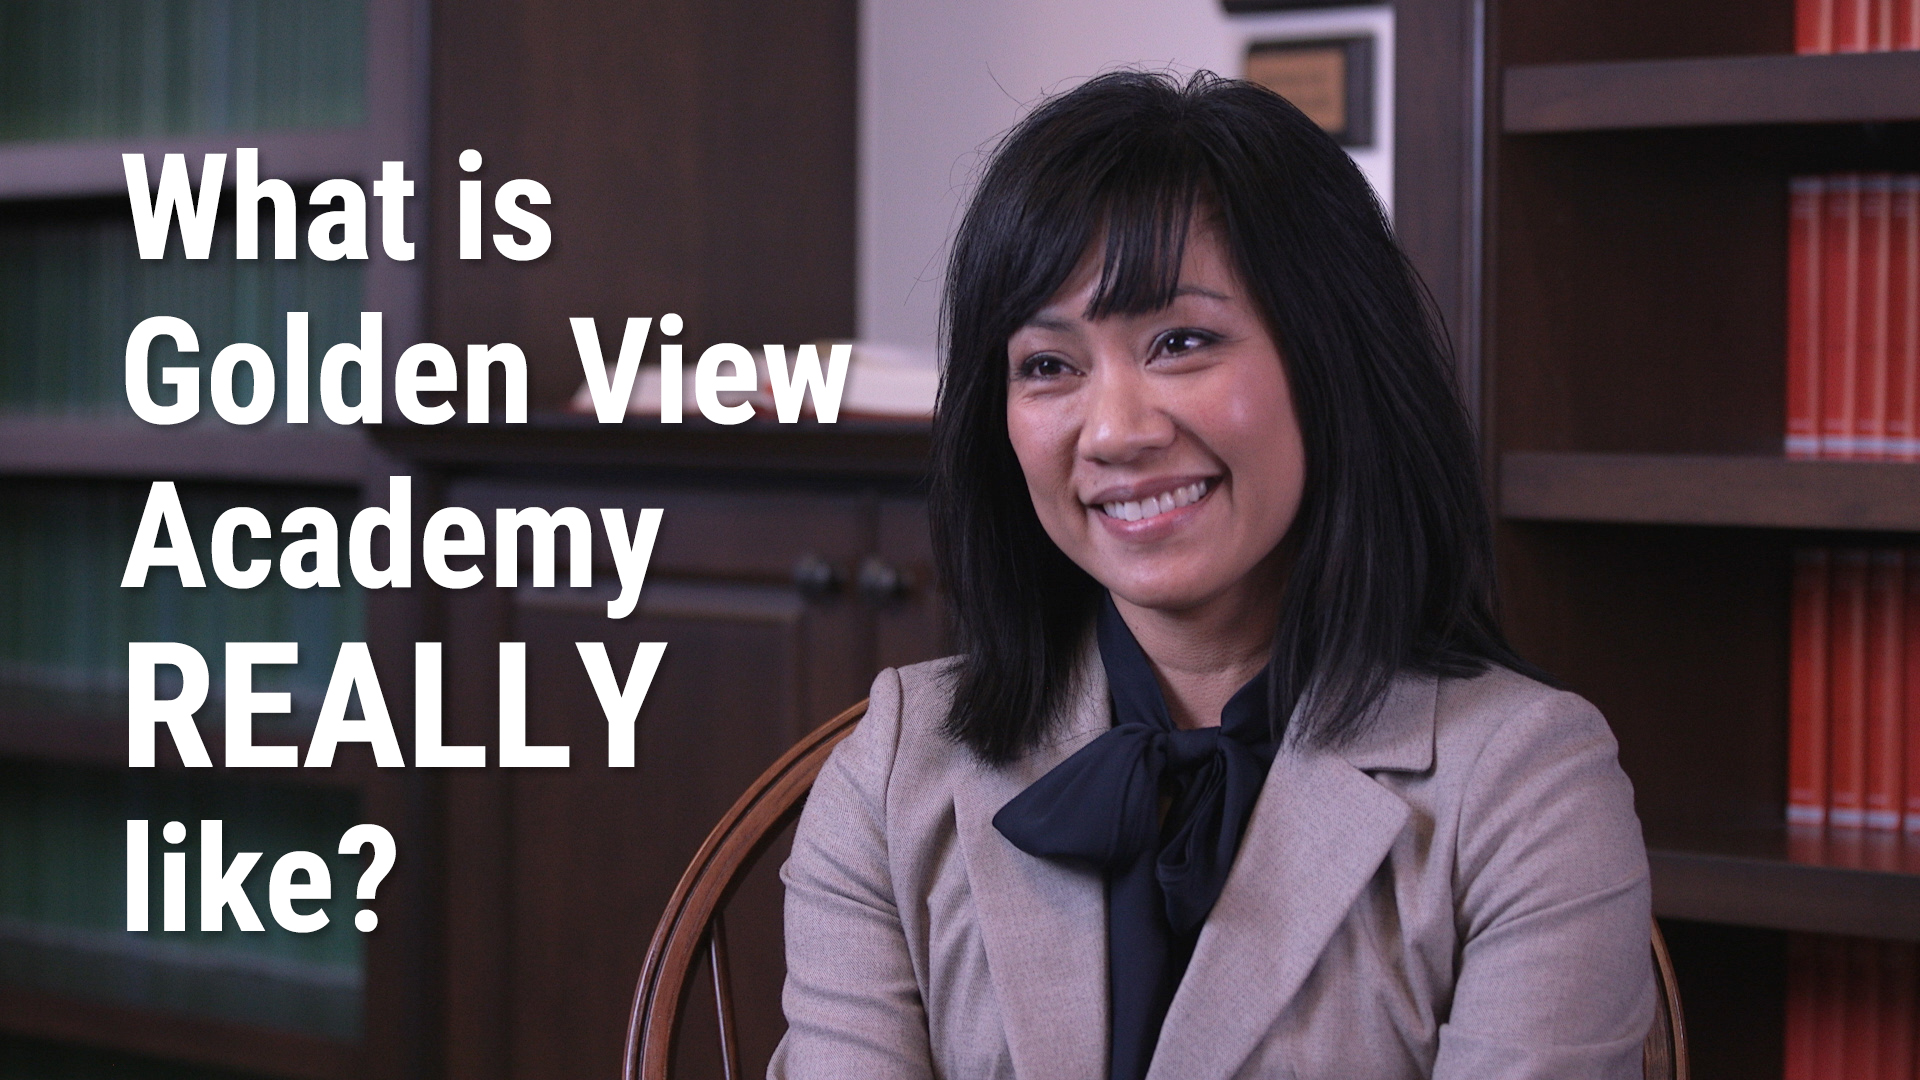 What is Golden View Academy REALLY like?